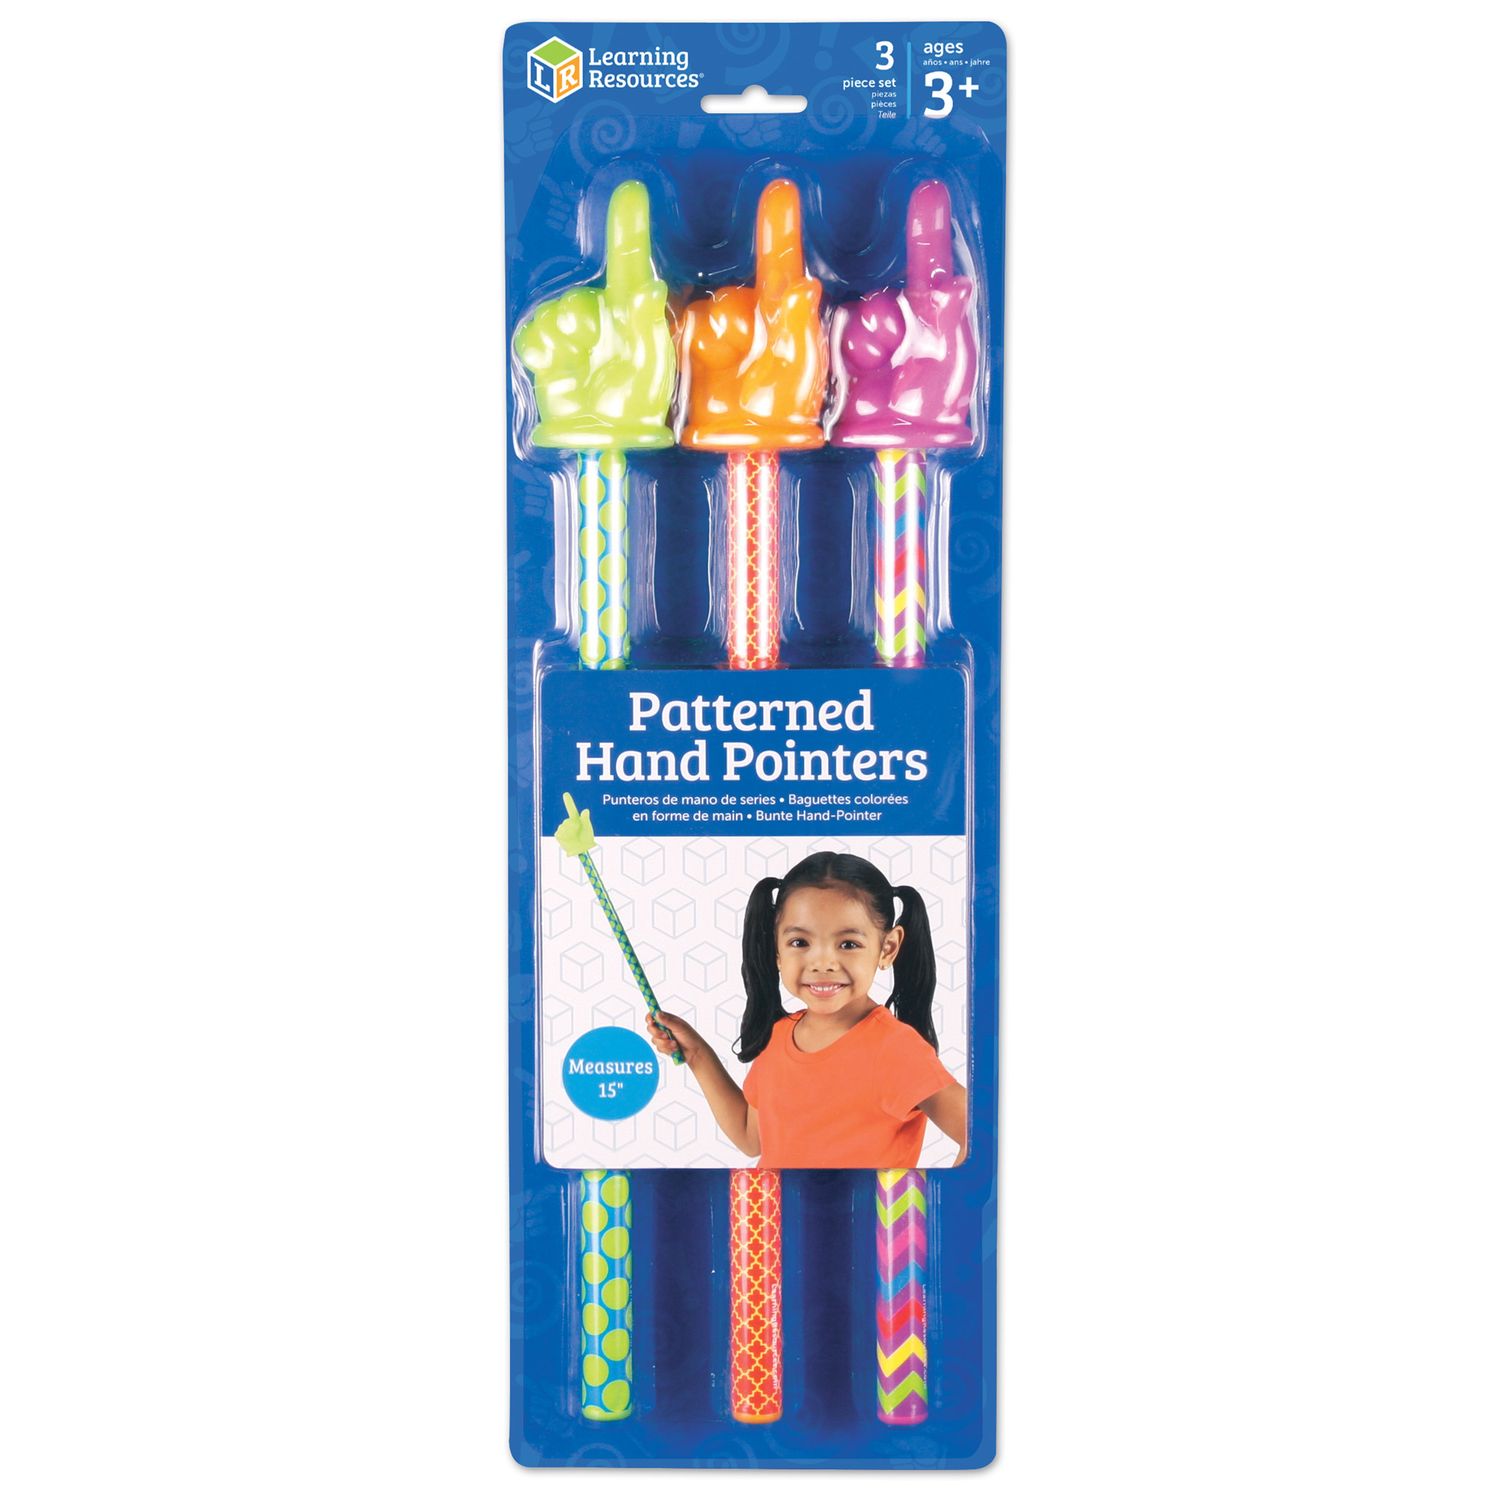 Image for Learning Resources 3-pc. Patterned Hand Pointers Set at Kohl's.